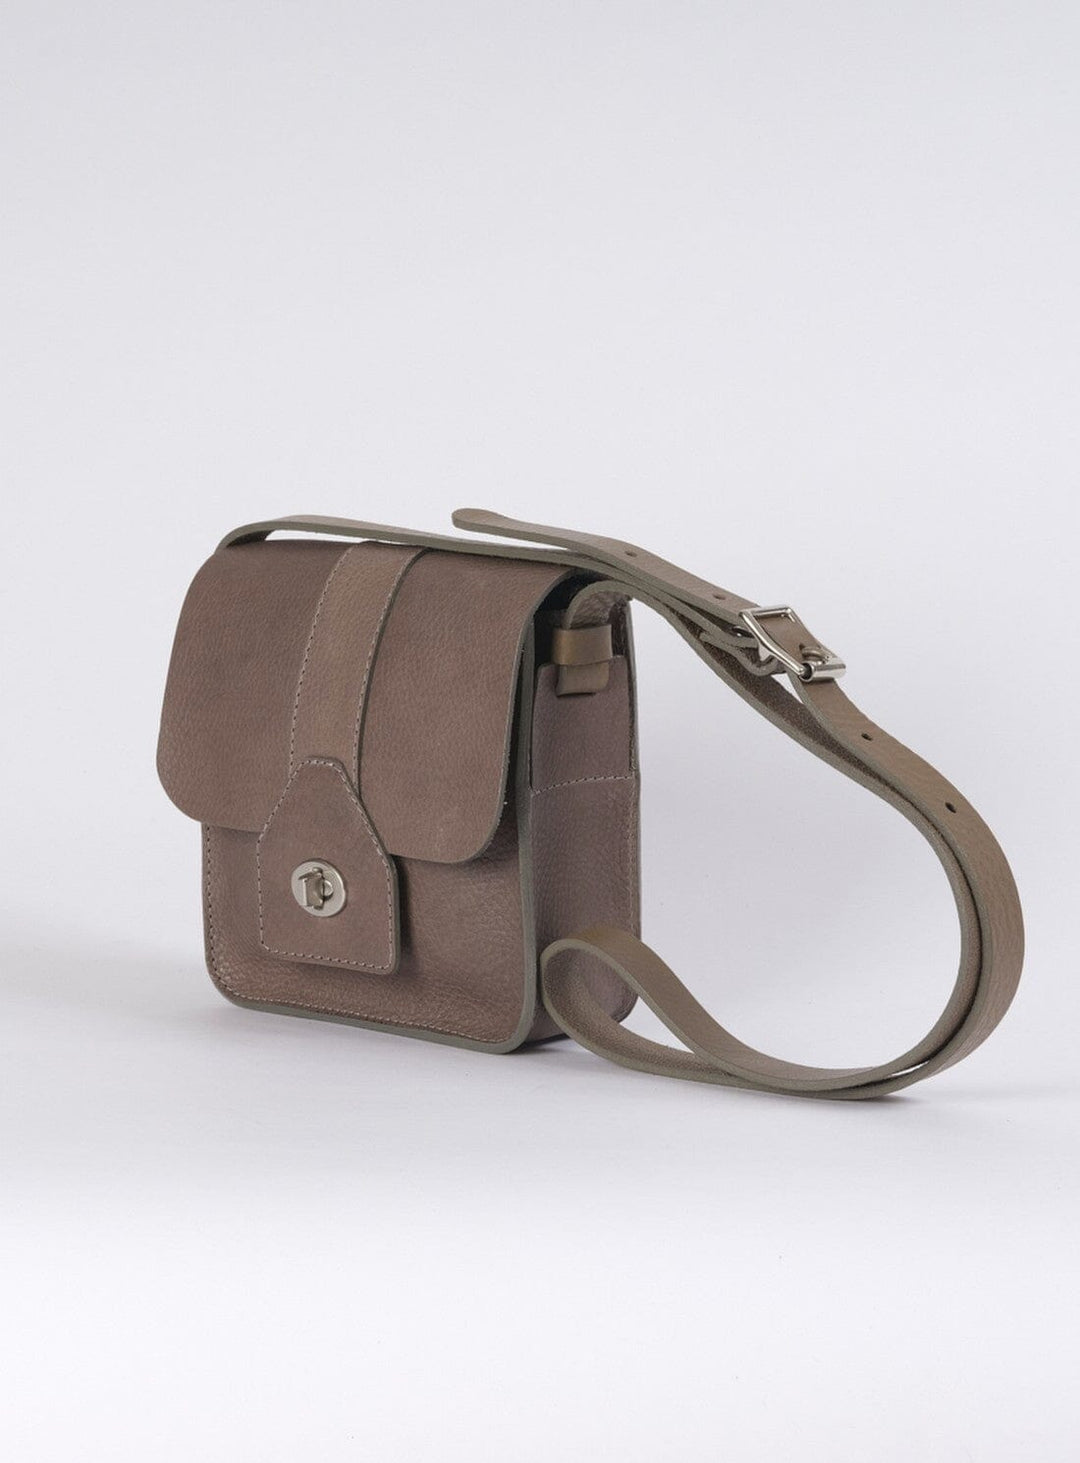 Tregoose Square Bag in Graphite Bags YBDFinds 